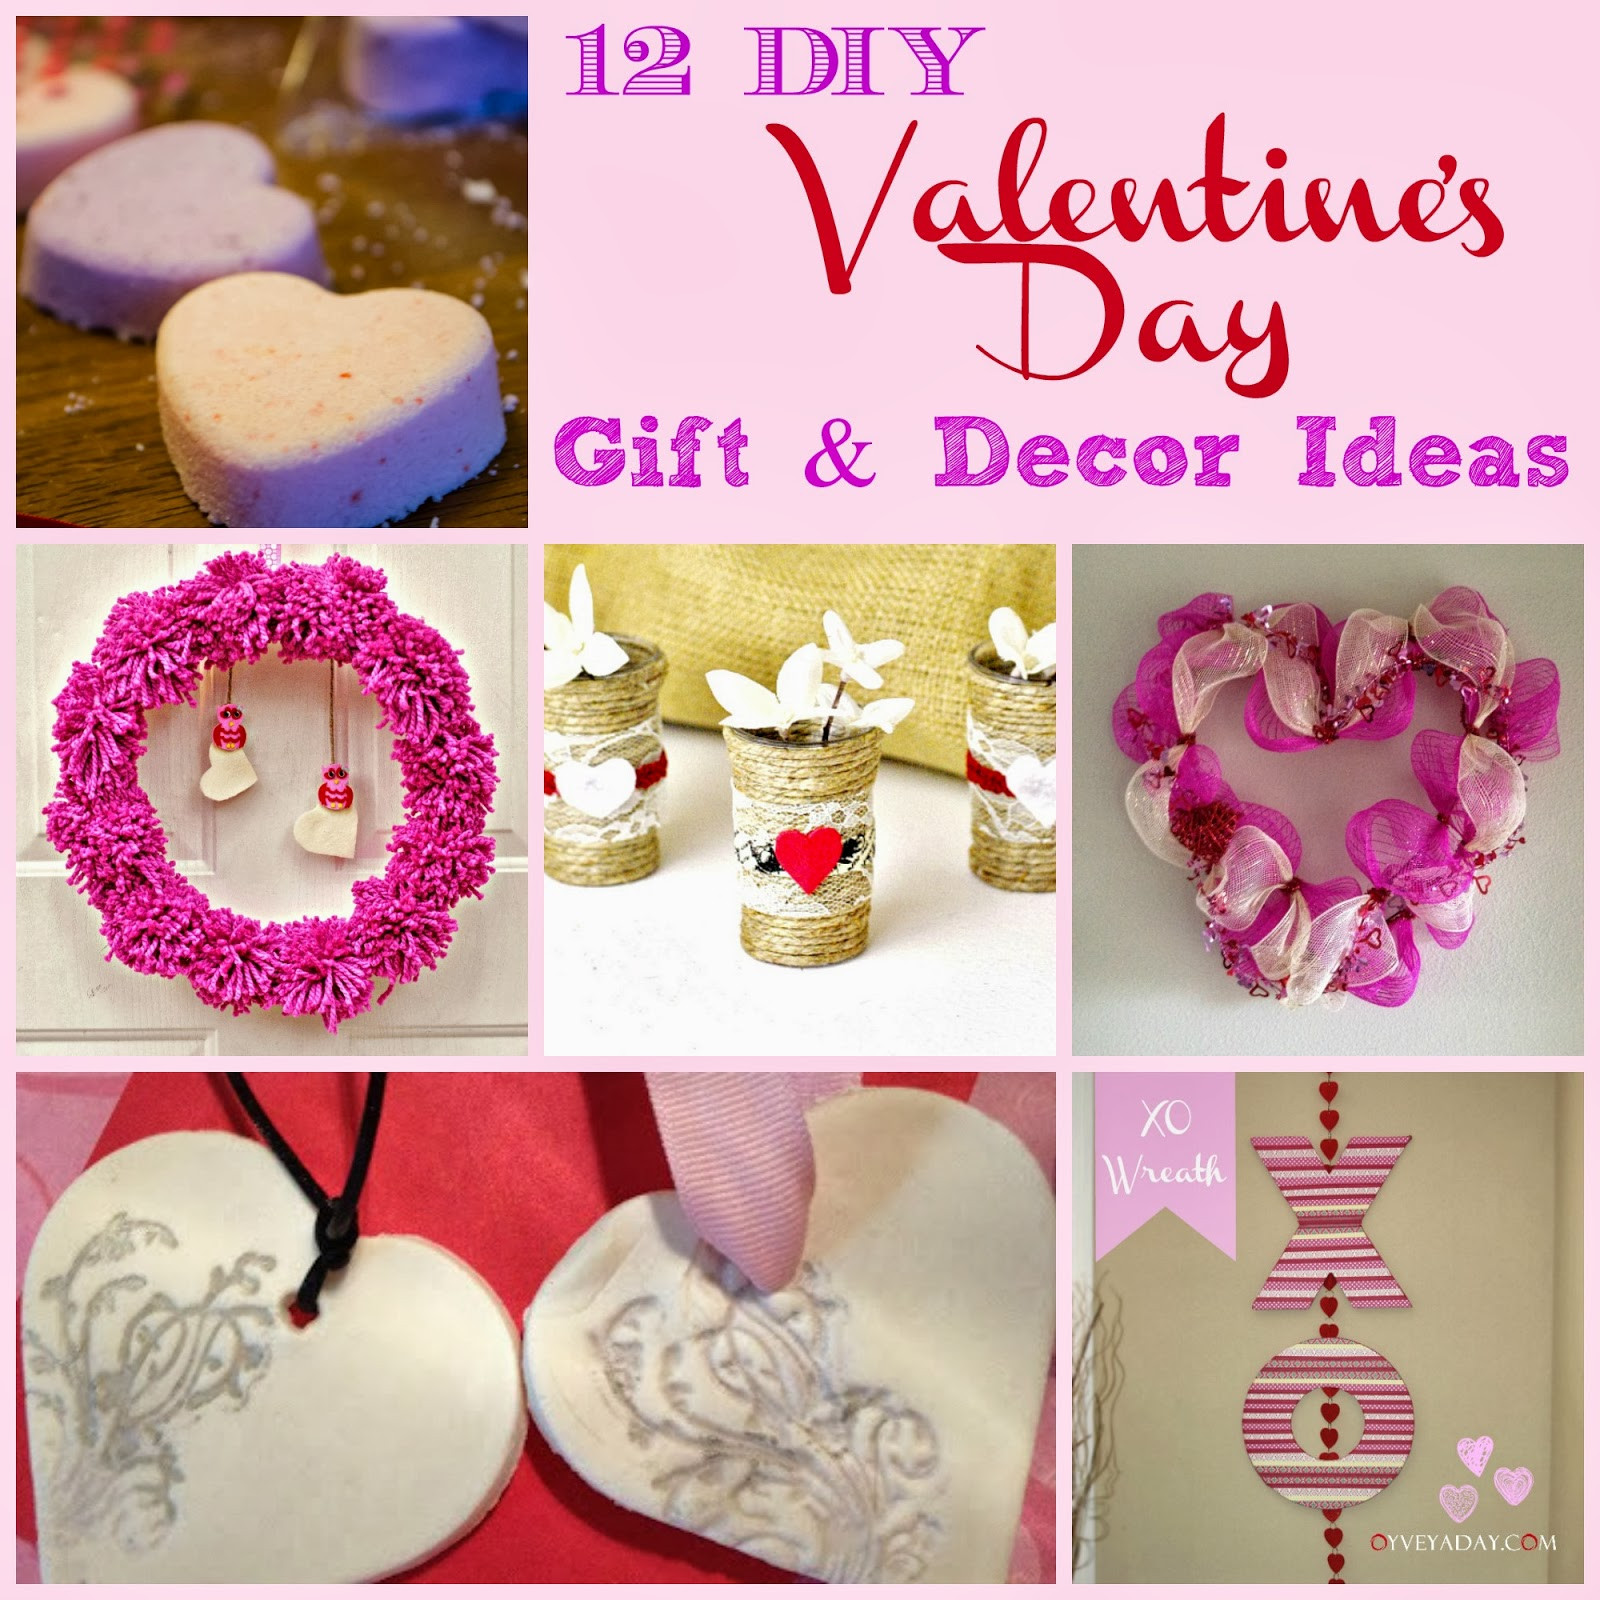 Valentines Day Gift Ideas Homemade
 12 DIY Valentine s Day Gift & Decor Ideas Outnumbered 3 to 1